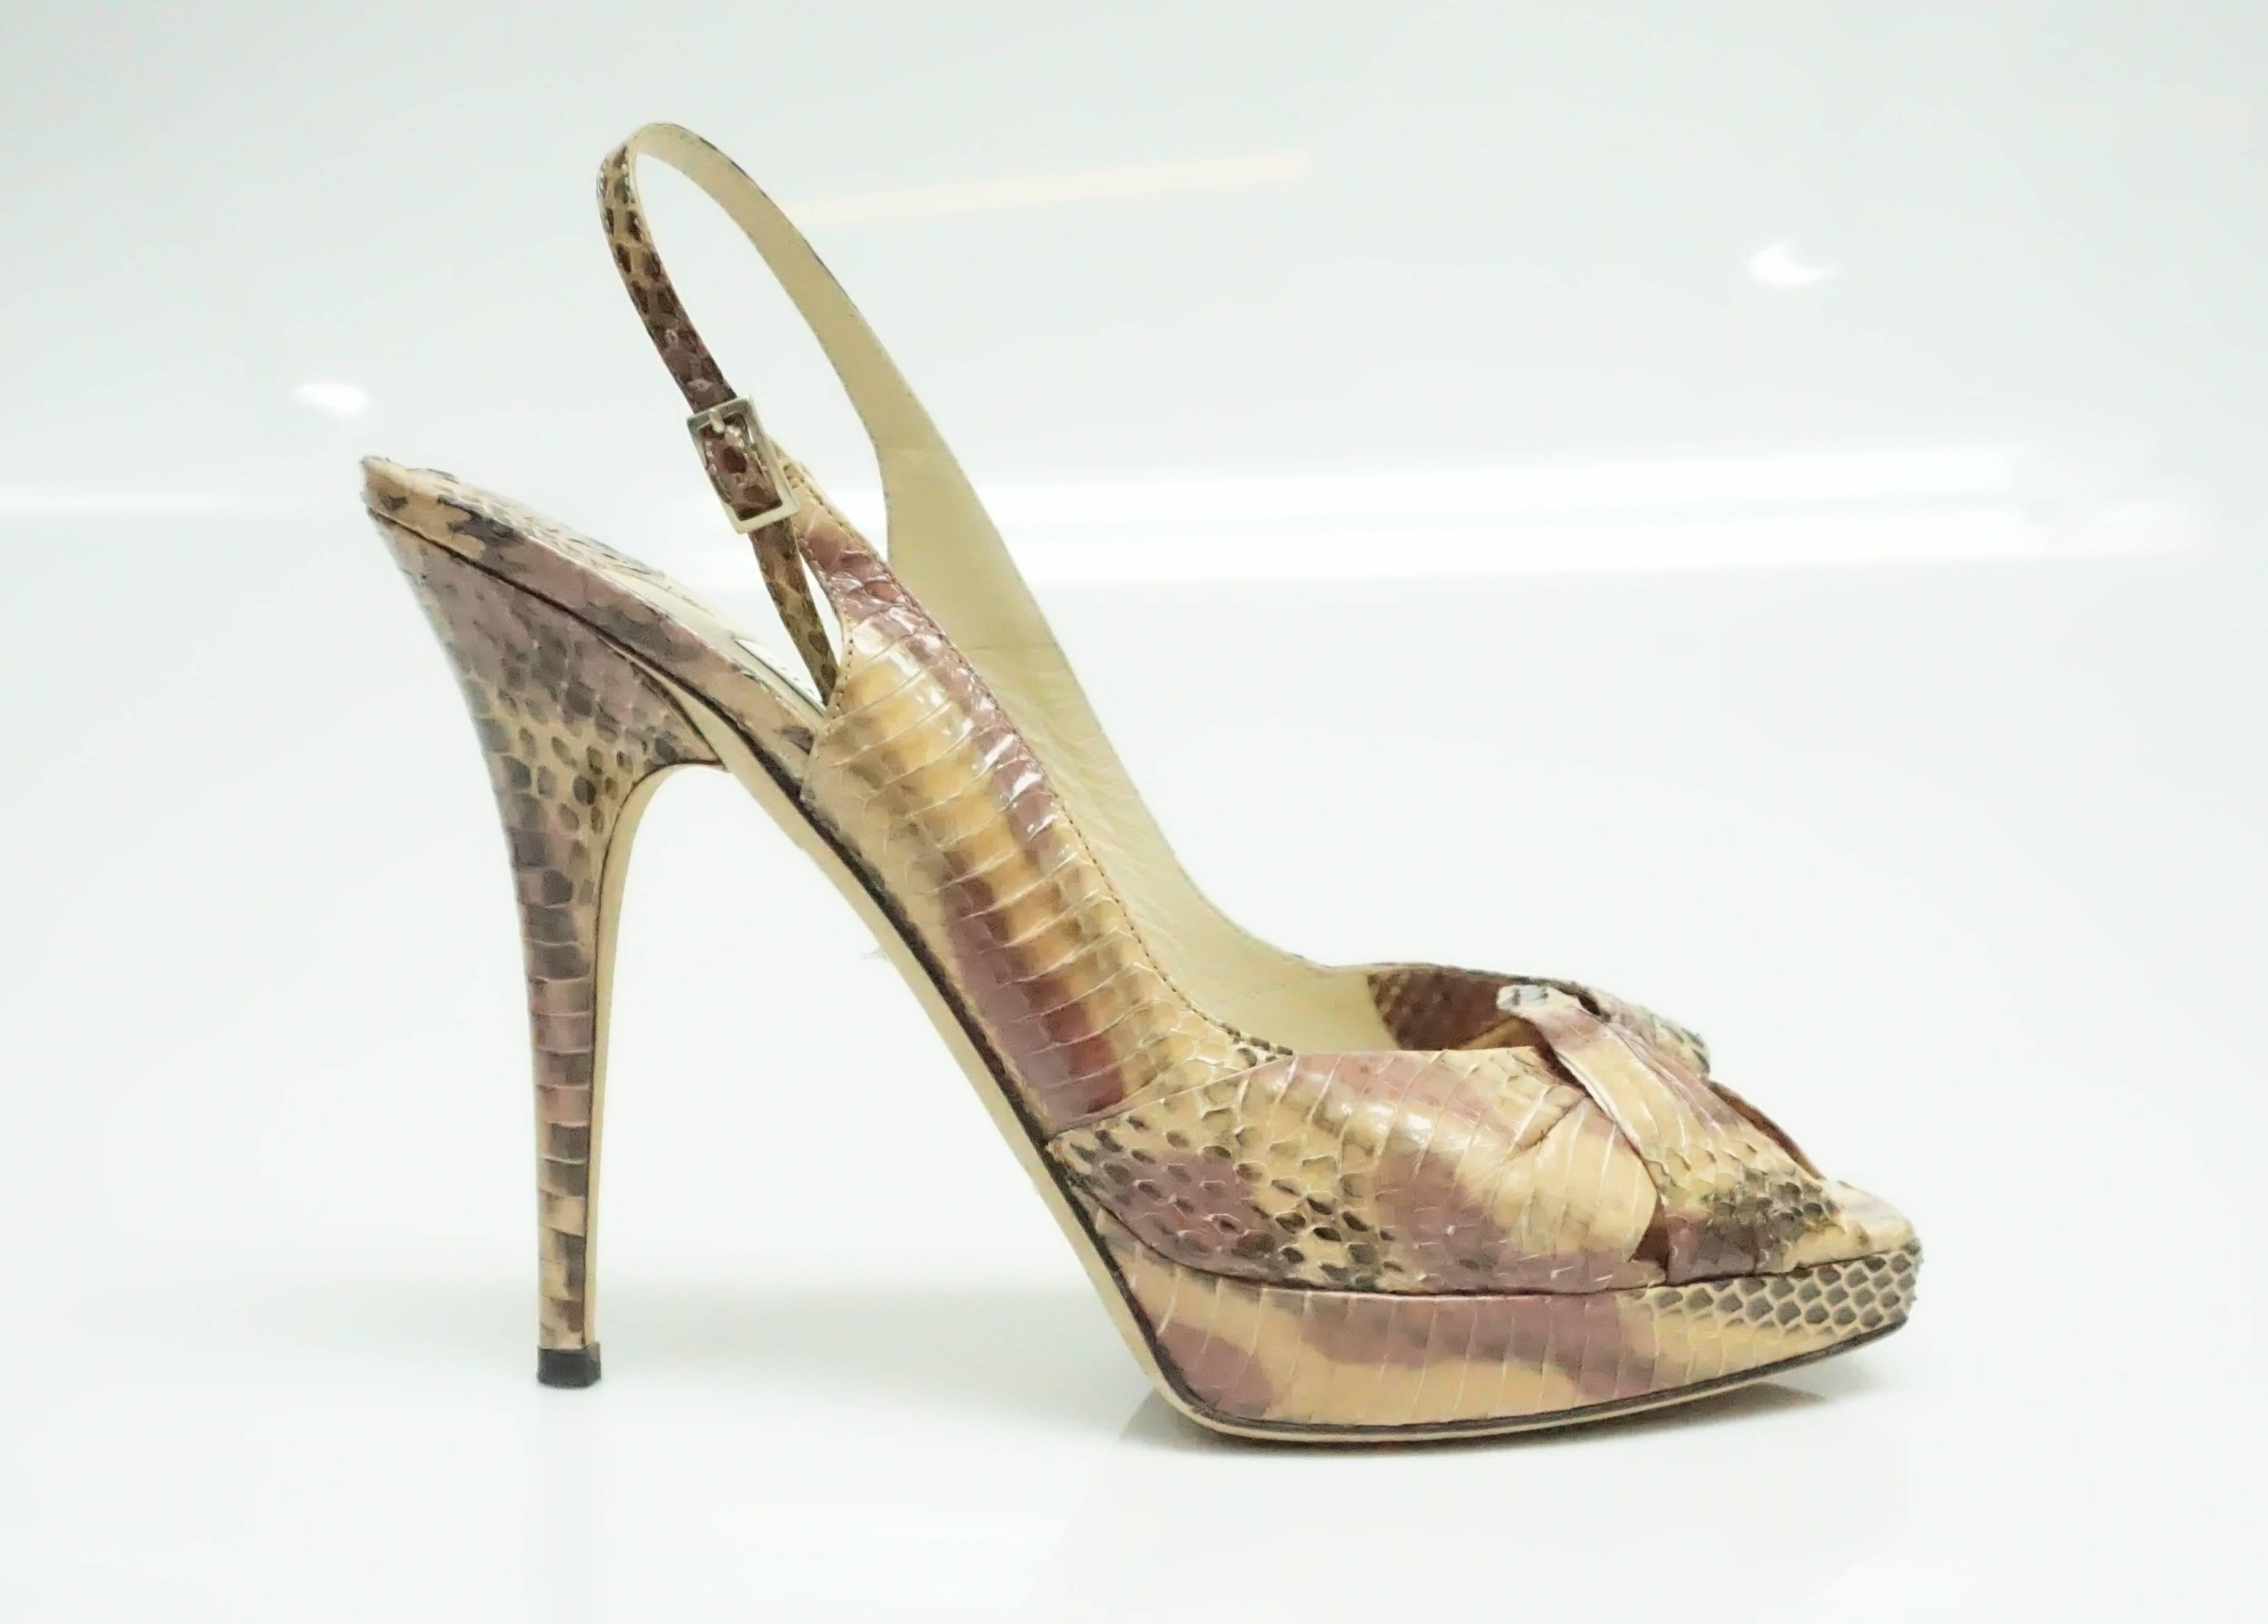 Jimmy Choo Pink Python Slingbacks - 40  These python pumps are in good condition. They consist of colors ranging from pink, nude, and brown. They have a peep toe that has a crossing over effect. The inside of the shoe has some wear on it and the